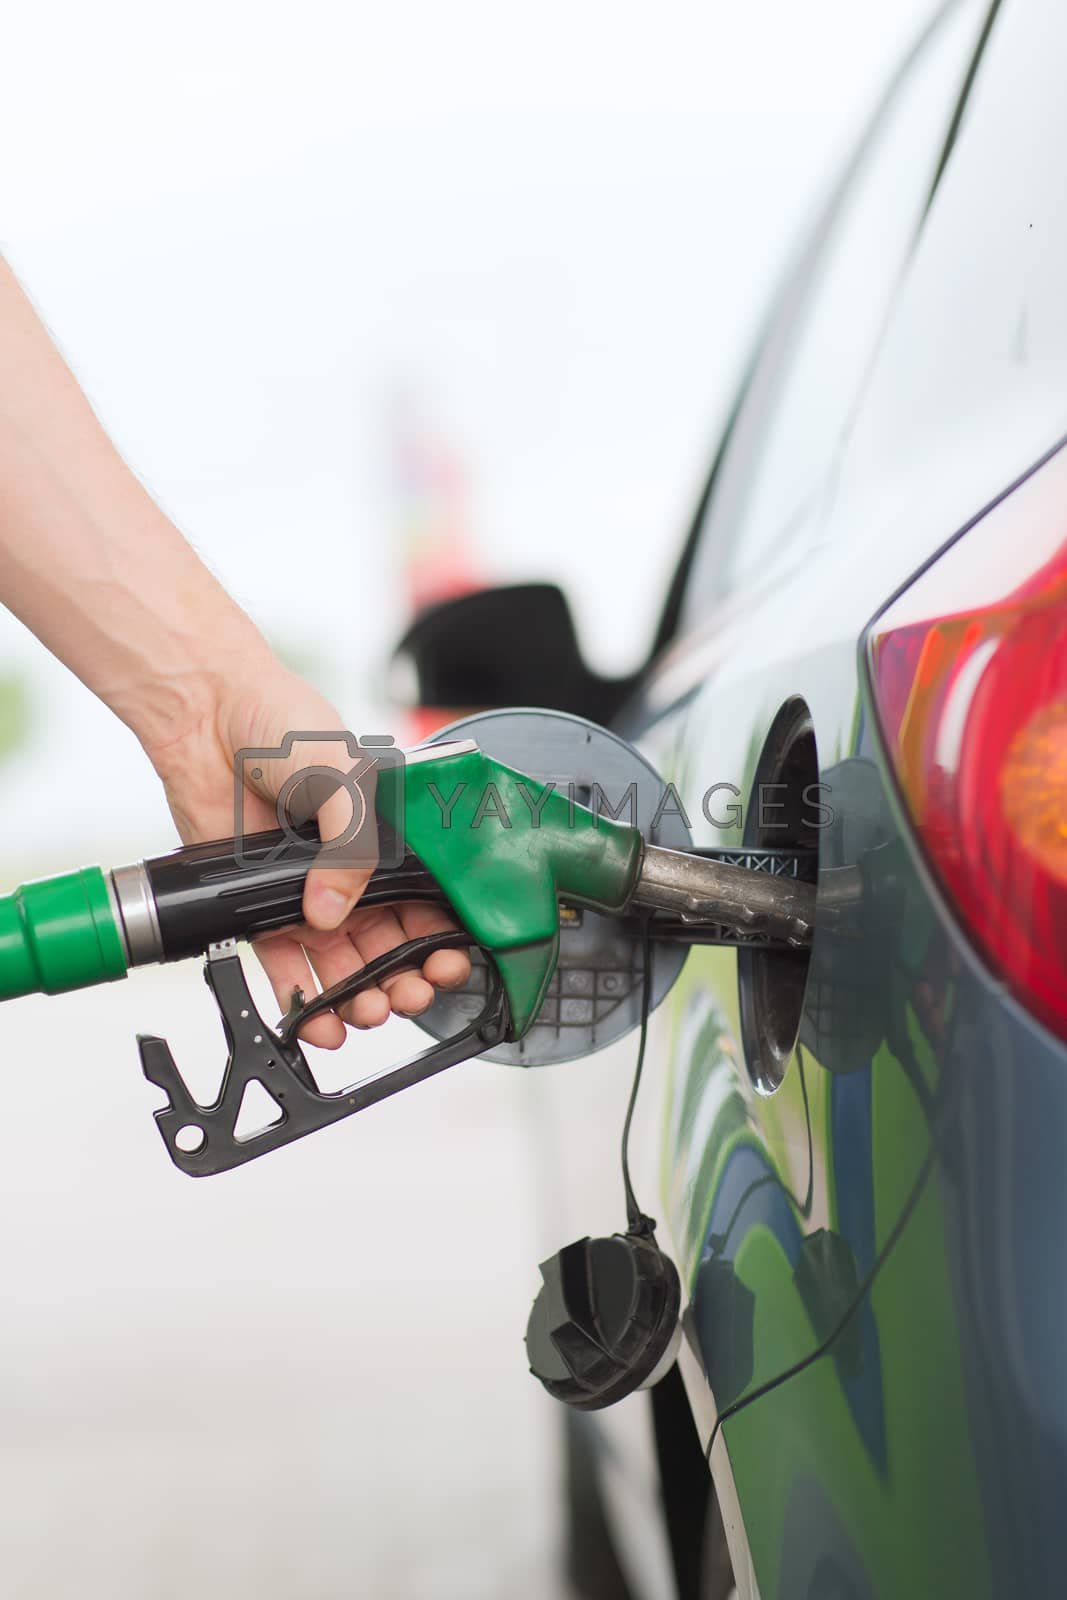 Royalty free image of man pumping gasoline fuel in car at gas station by dolgachov